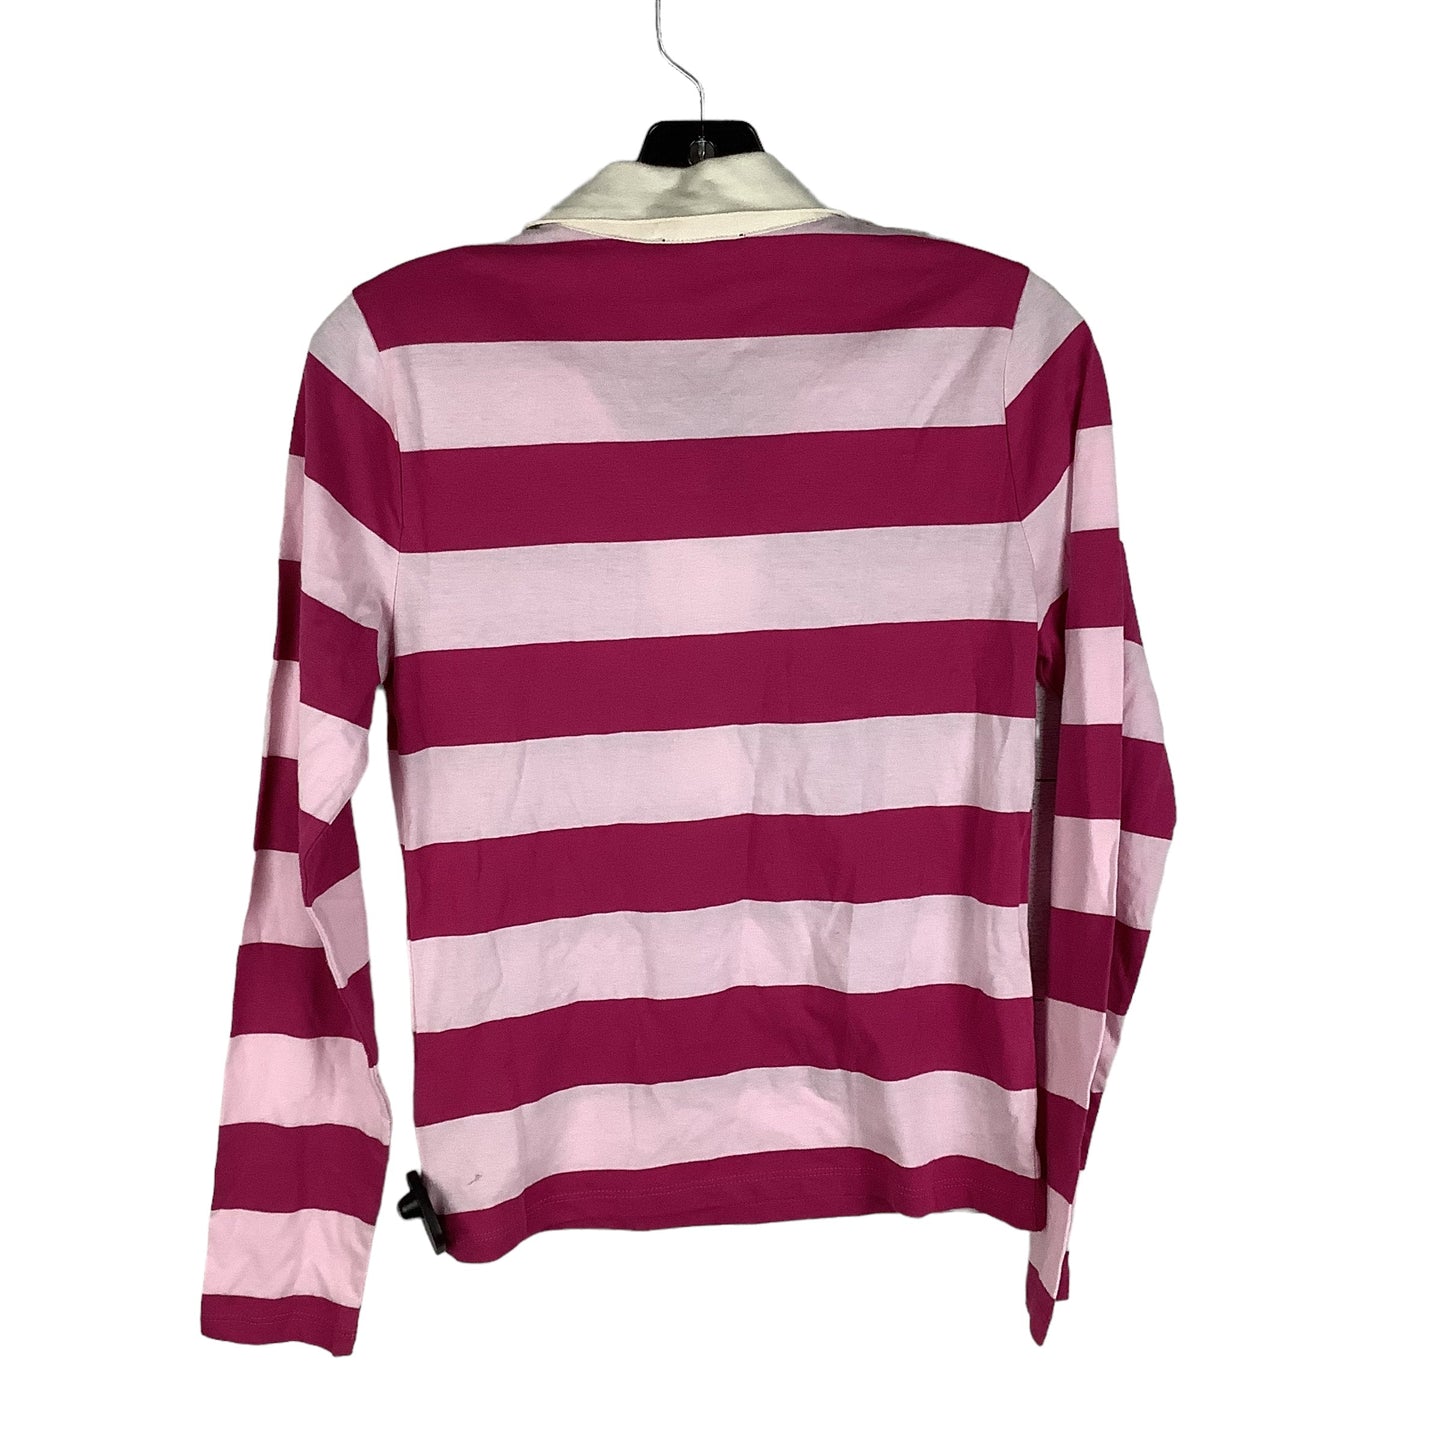 Pink Top Long Sleeve J. Crew, Size Xs